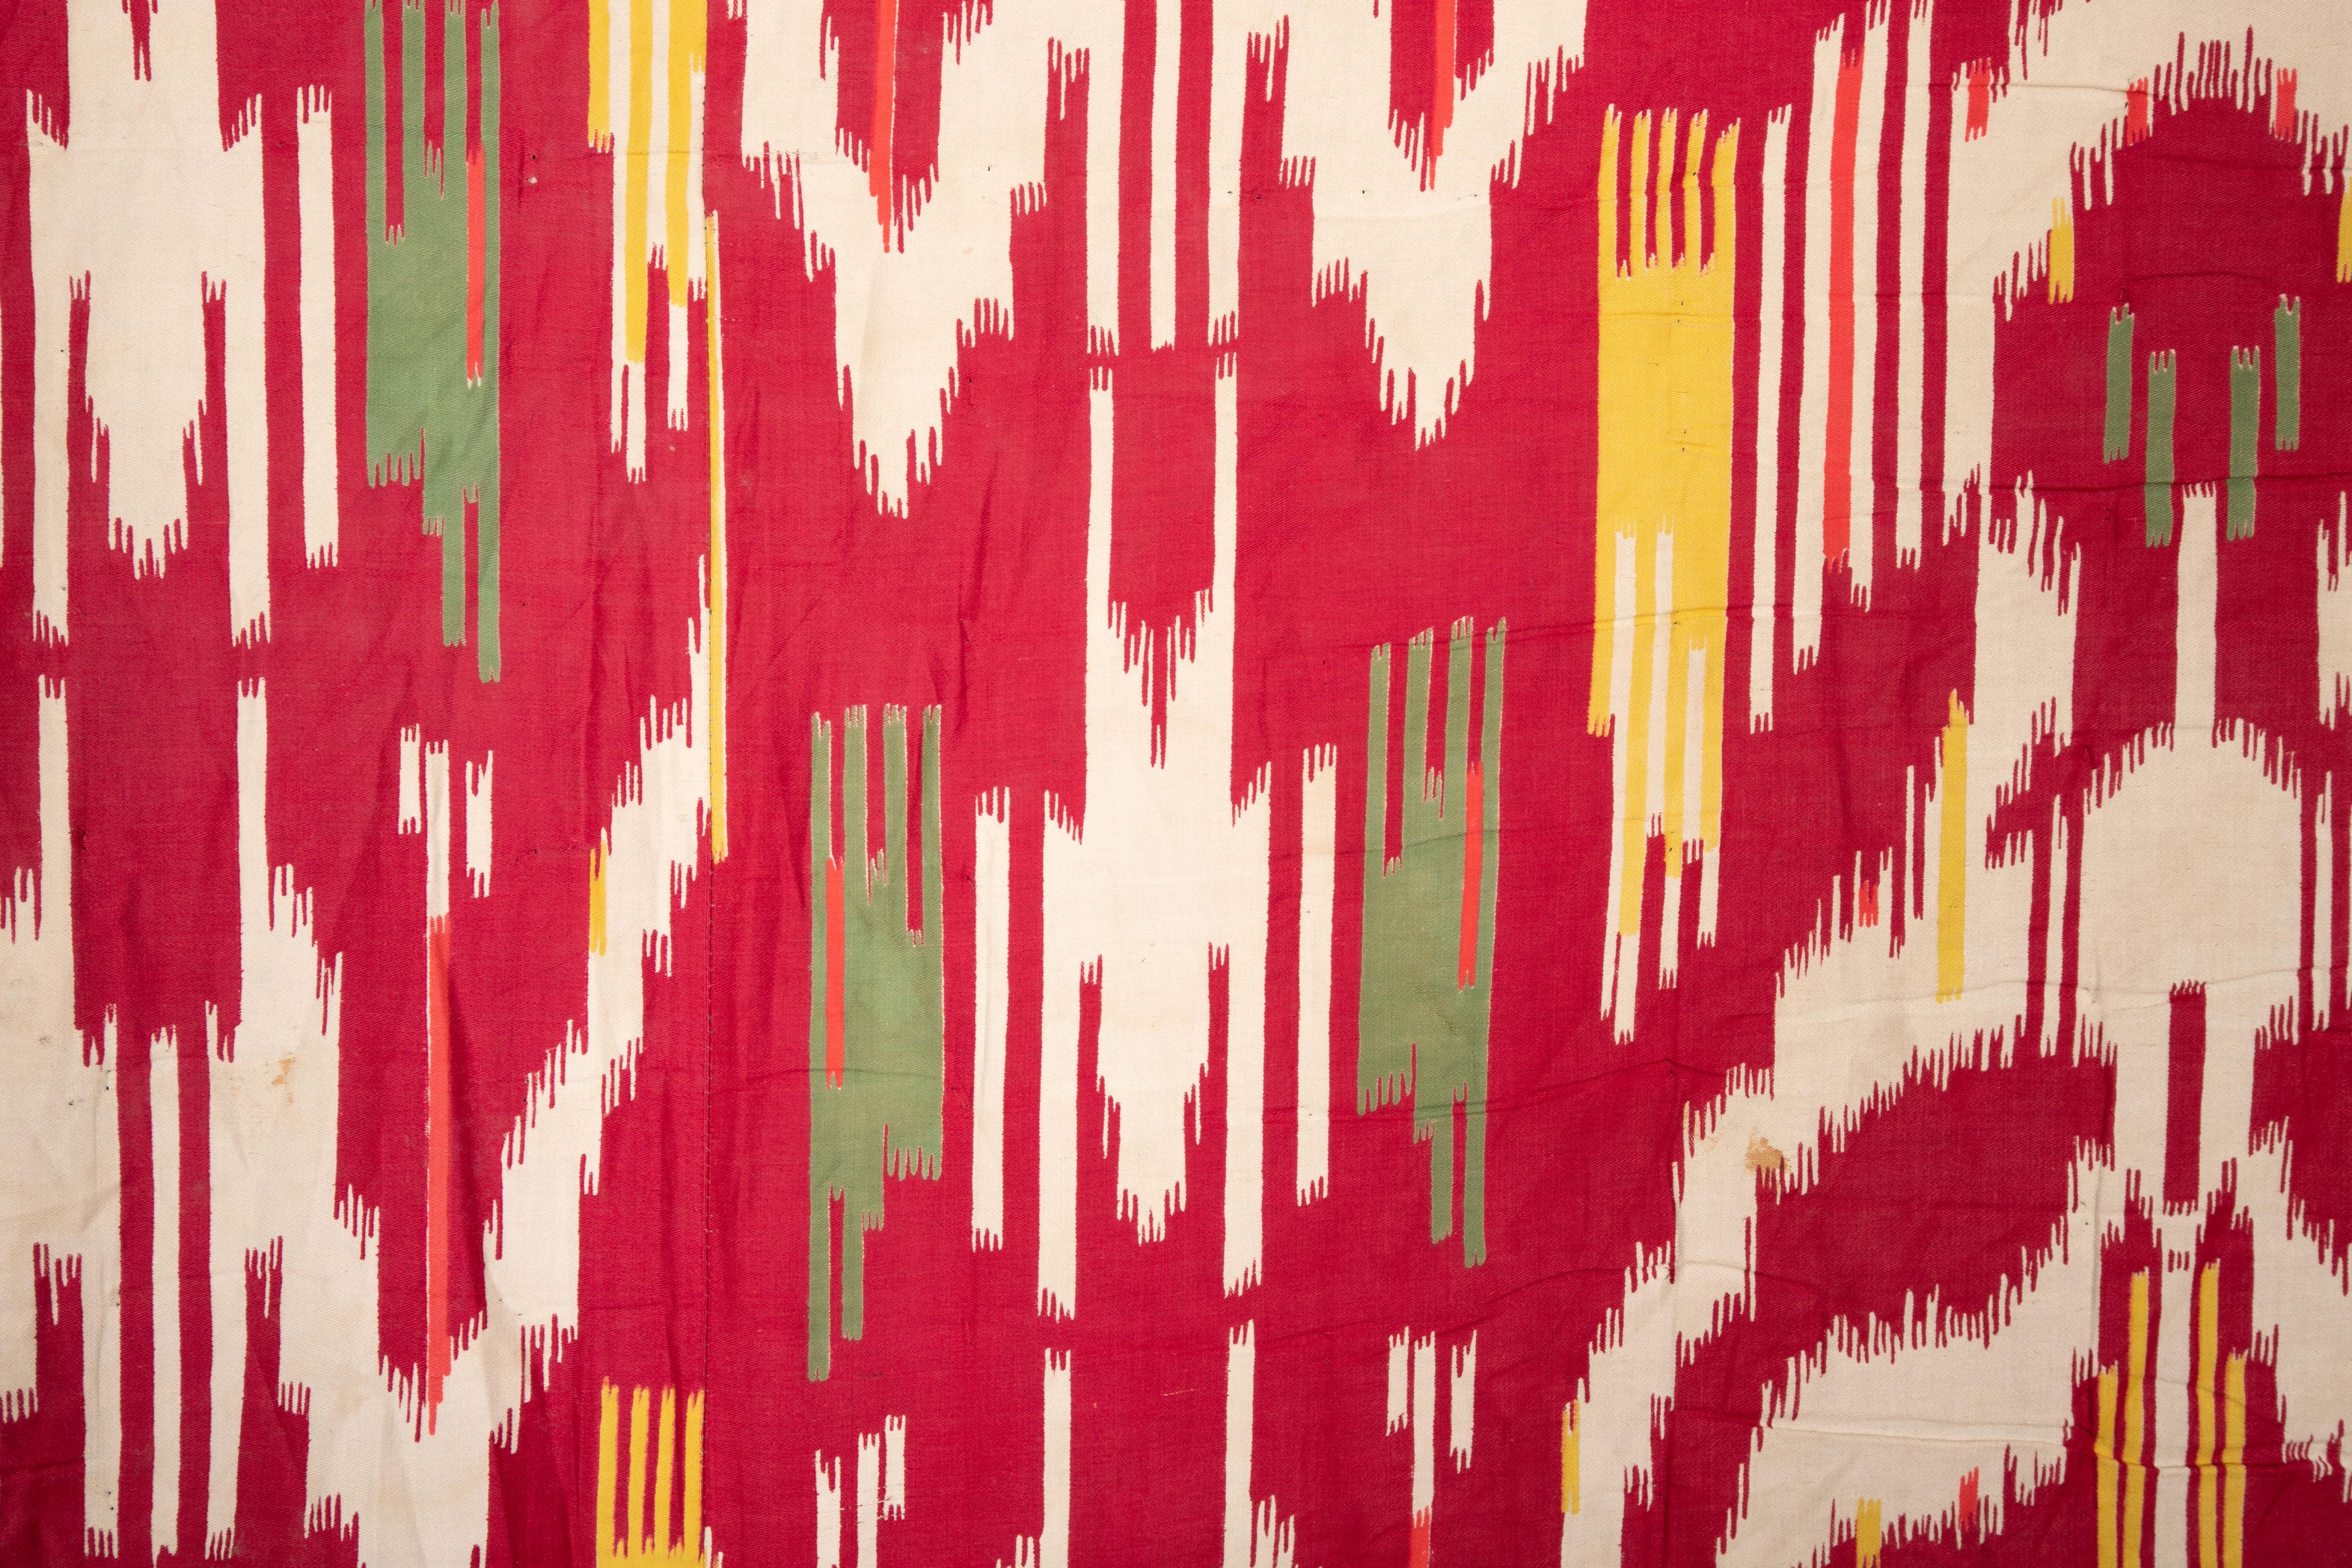 Russian Printed Ikat Design Cotton Fabric Panel, Mid-20th Century or Earlier For Sale 1